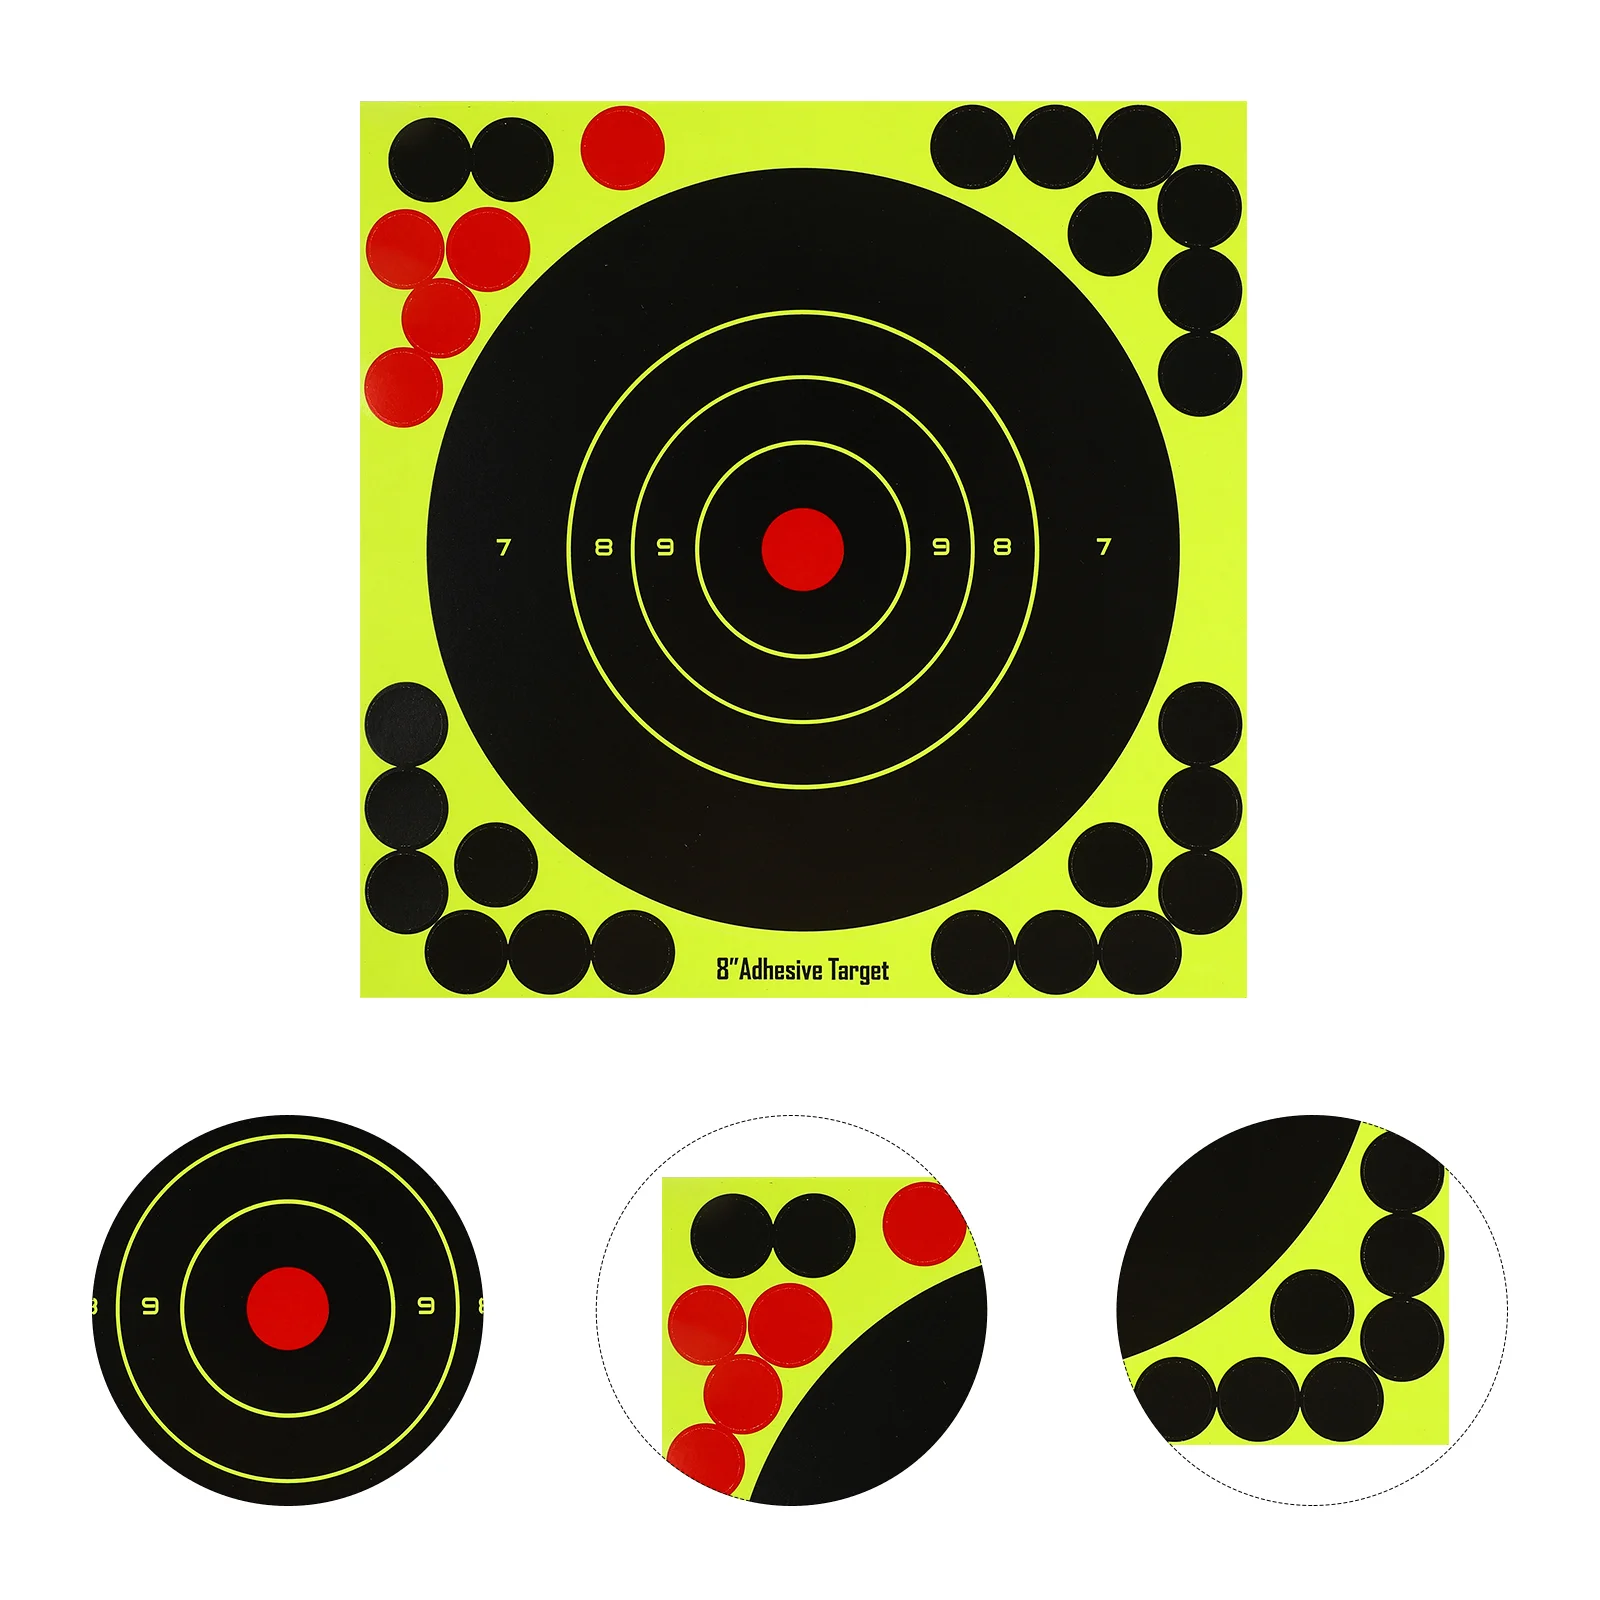 

30 Pcs Gun Target Paper Stickers Zone Targeted Papers Circle Aiming for Pvc Self-adhesive Round Splatter Targets